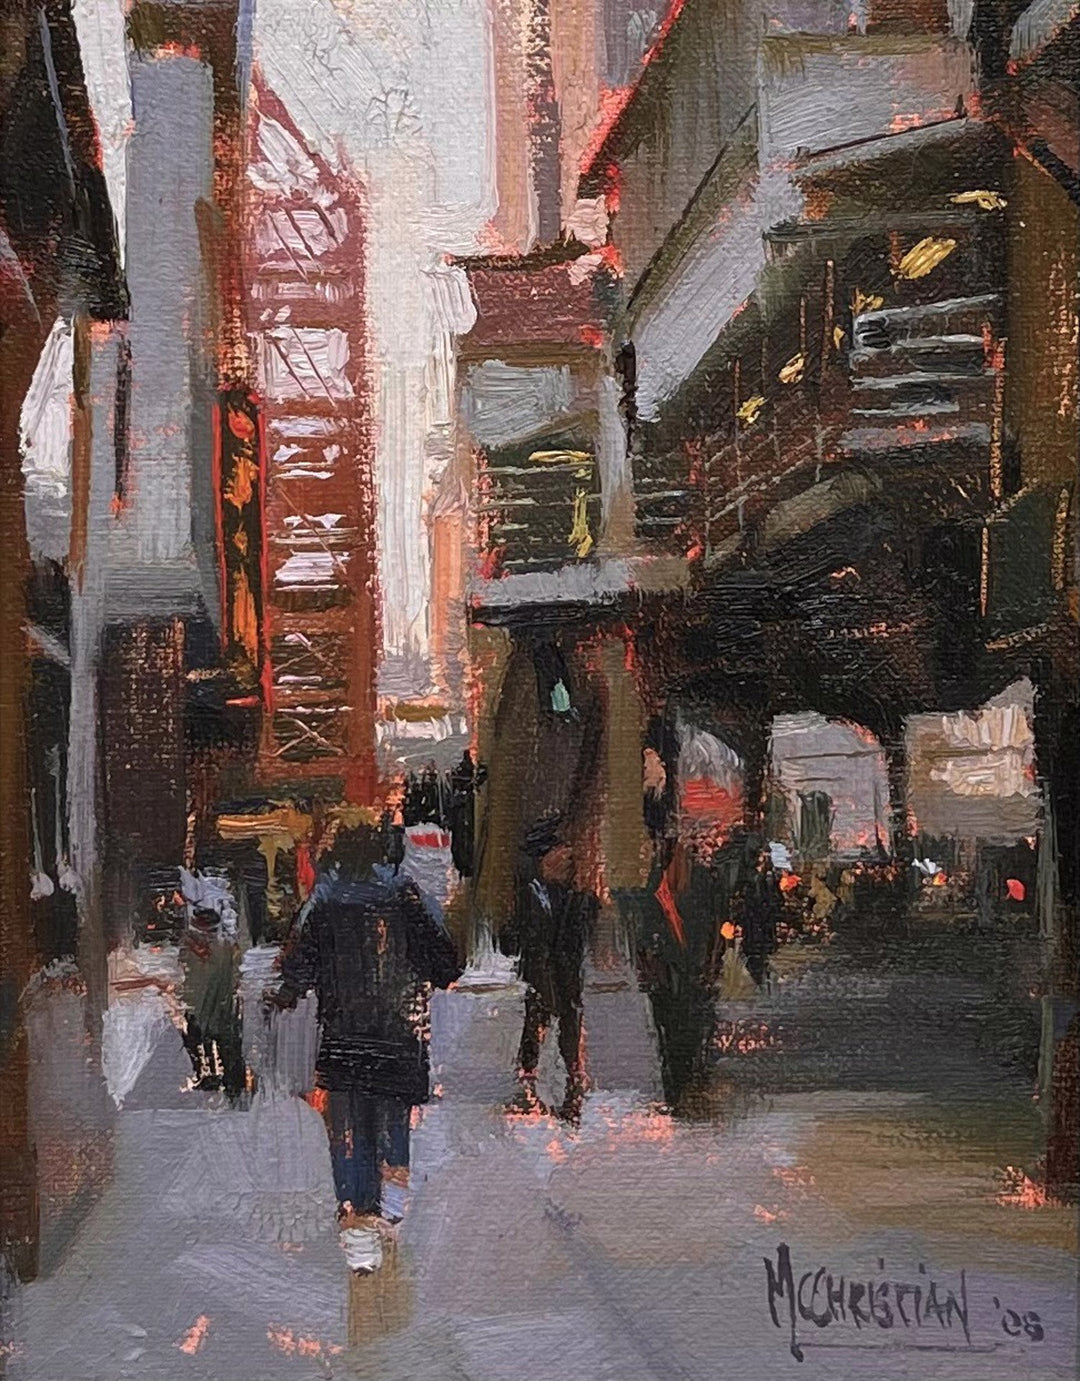 A 2008 painting by Jennifer McChristian, "Looking for Respite, 2008", depicting people walking down a street, providing a respite from the chaos of daily life.